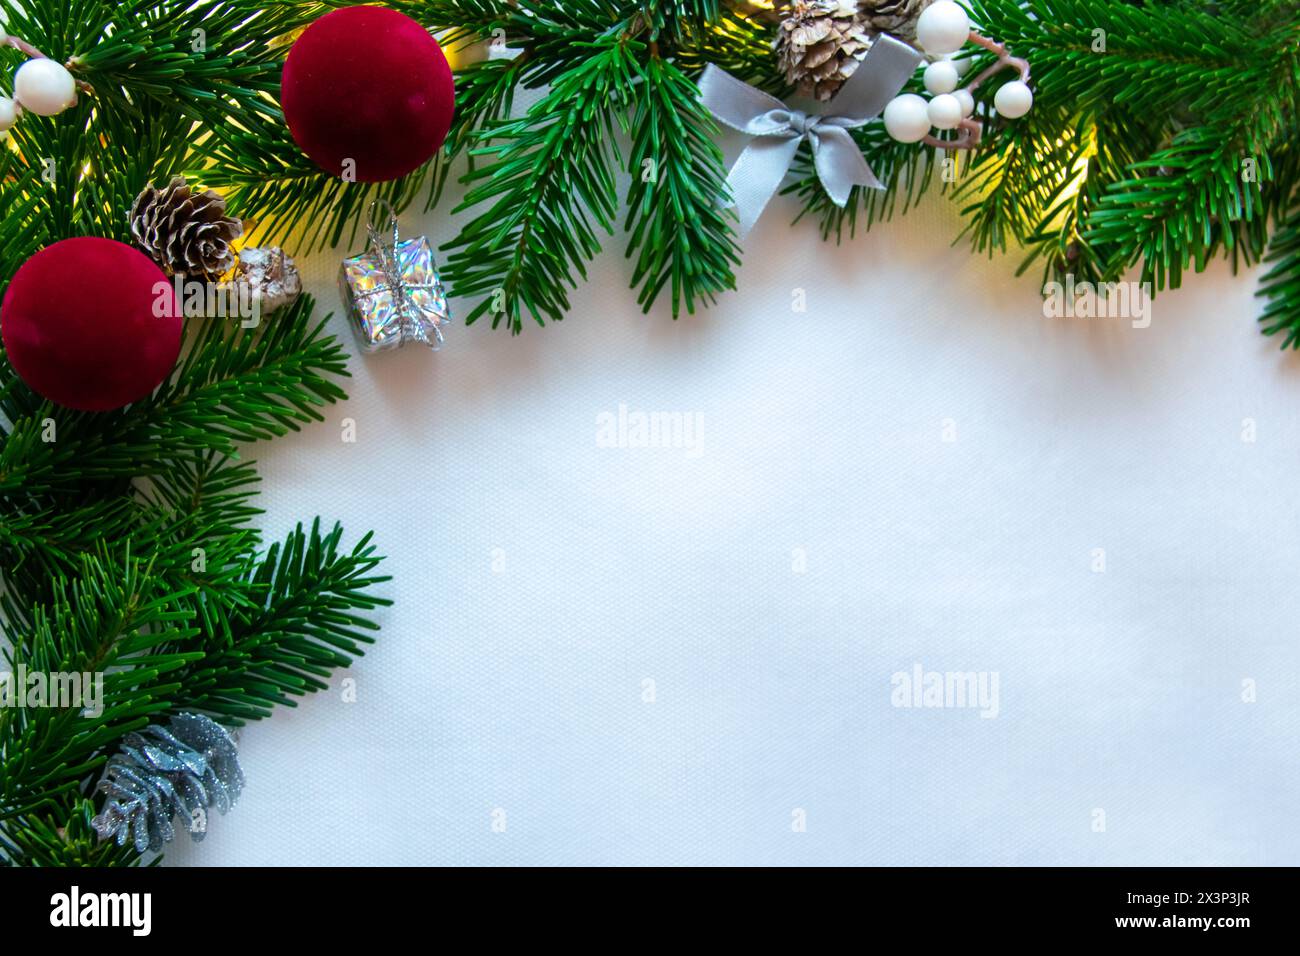 White background and Christmas tree spruce for frame with gifts, red ball, white berries, cones. Copy space. Top view. Stock Photo